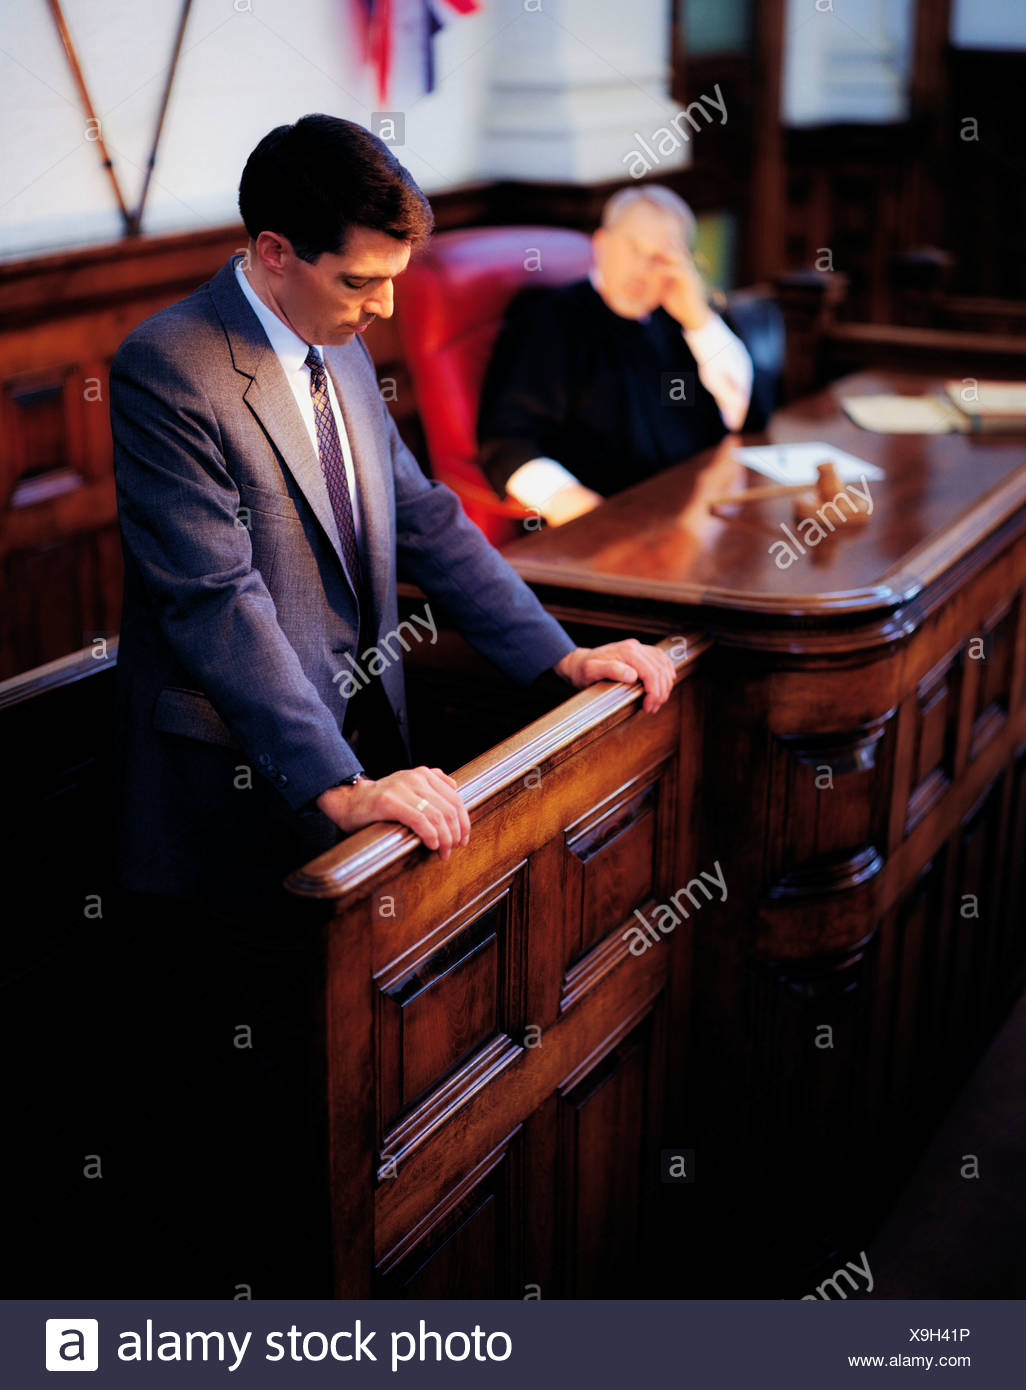 A Man On The Witness Stand In A Courtroom Stock Photo Alamy